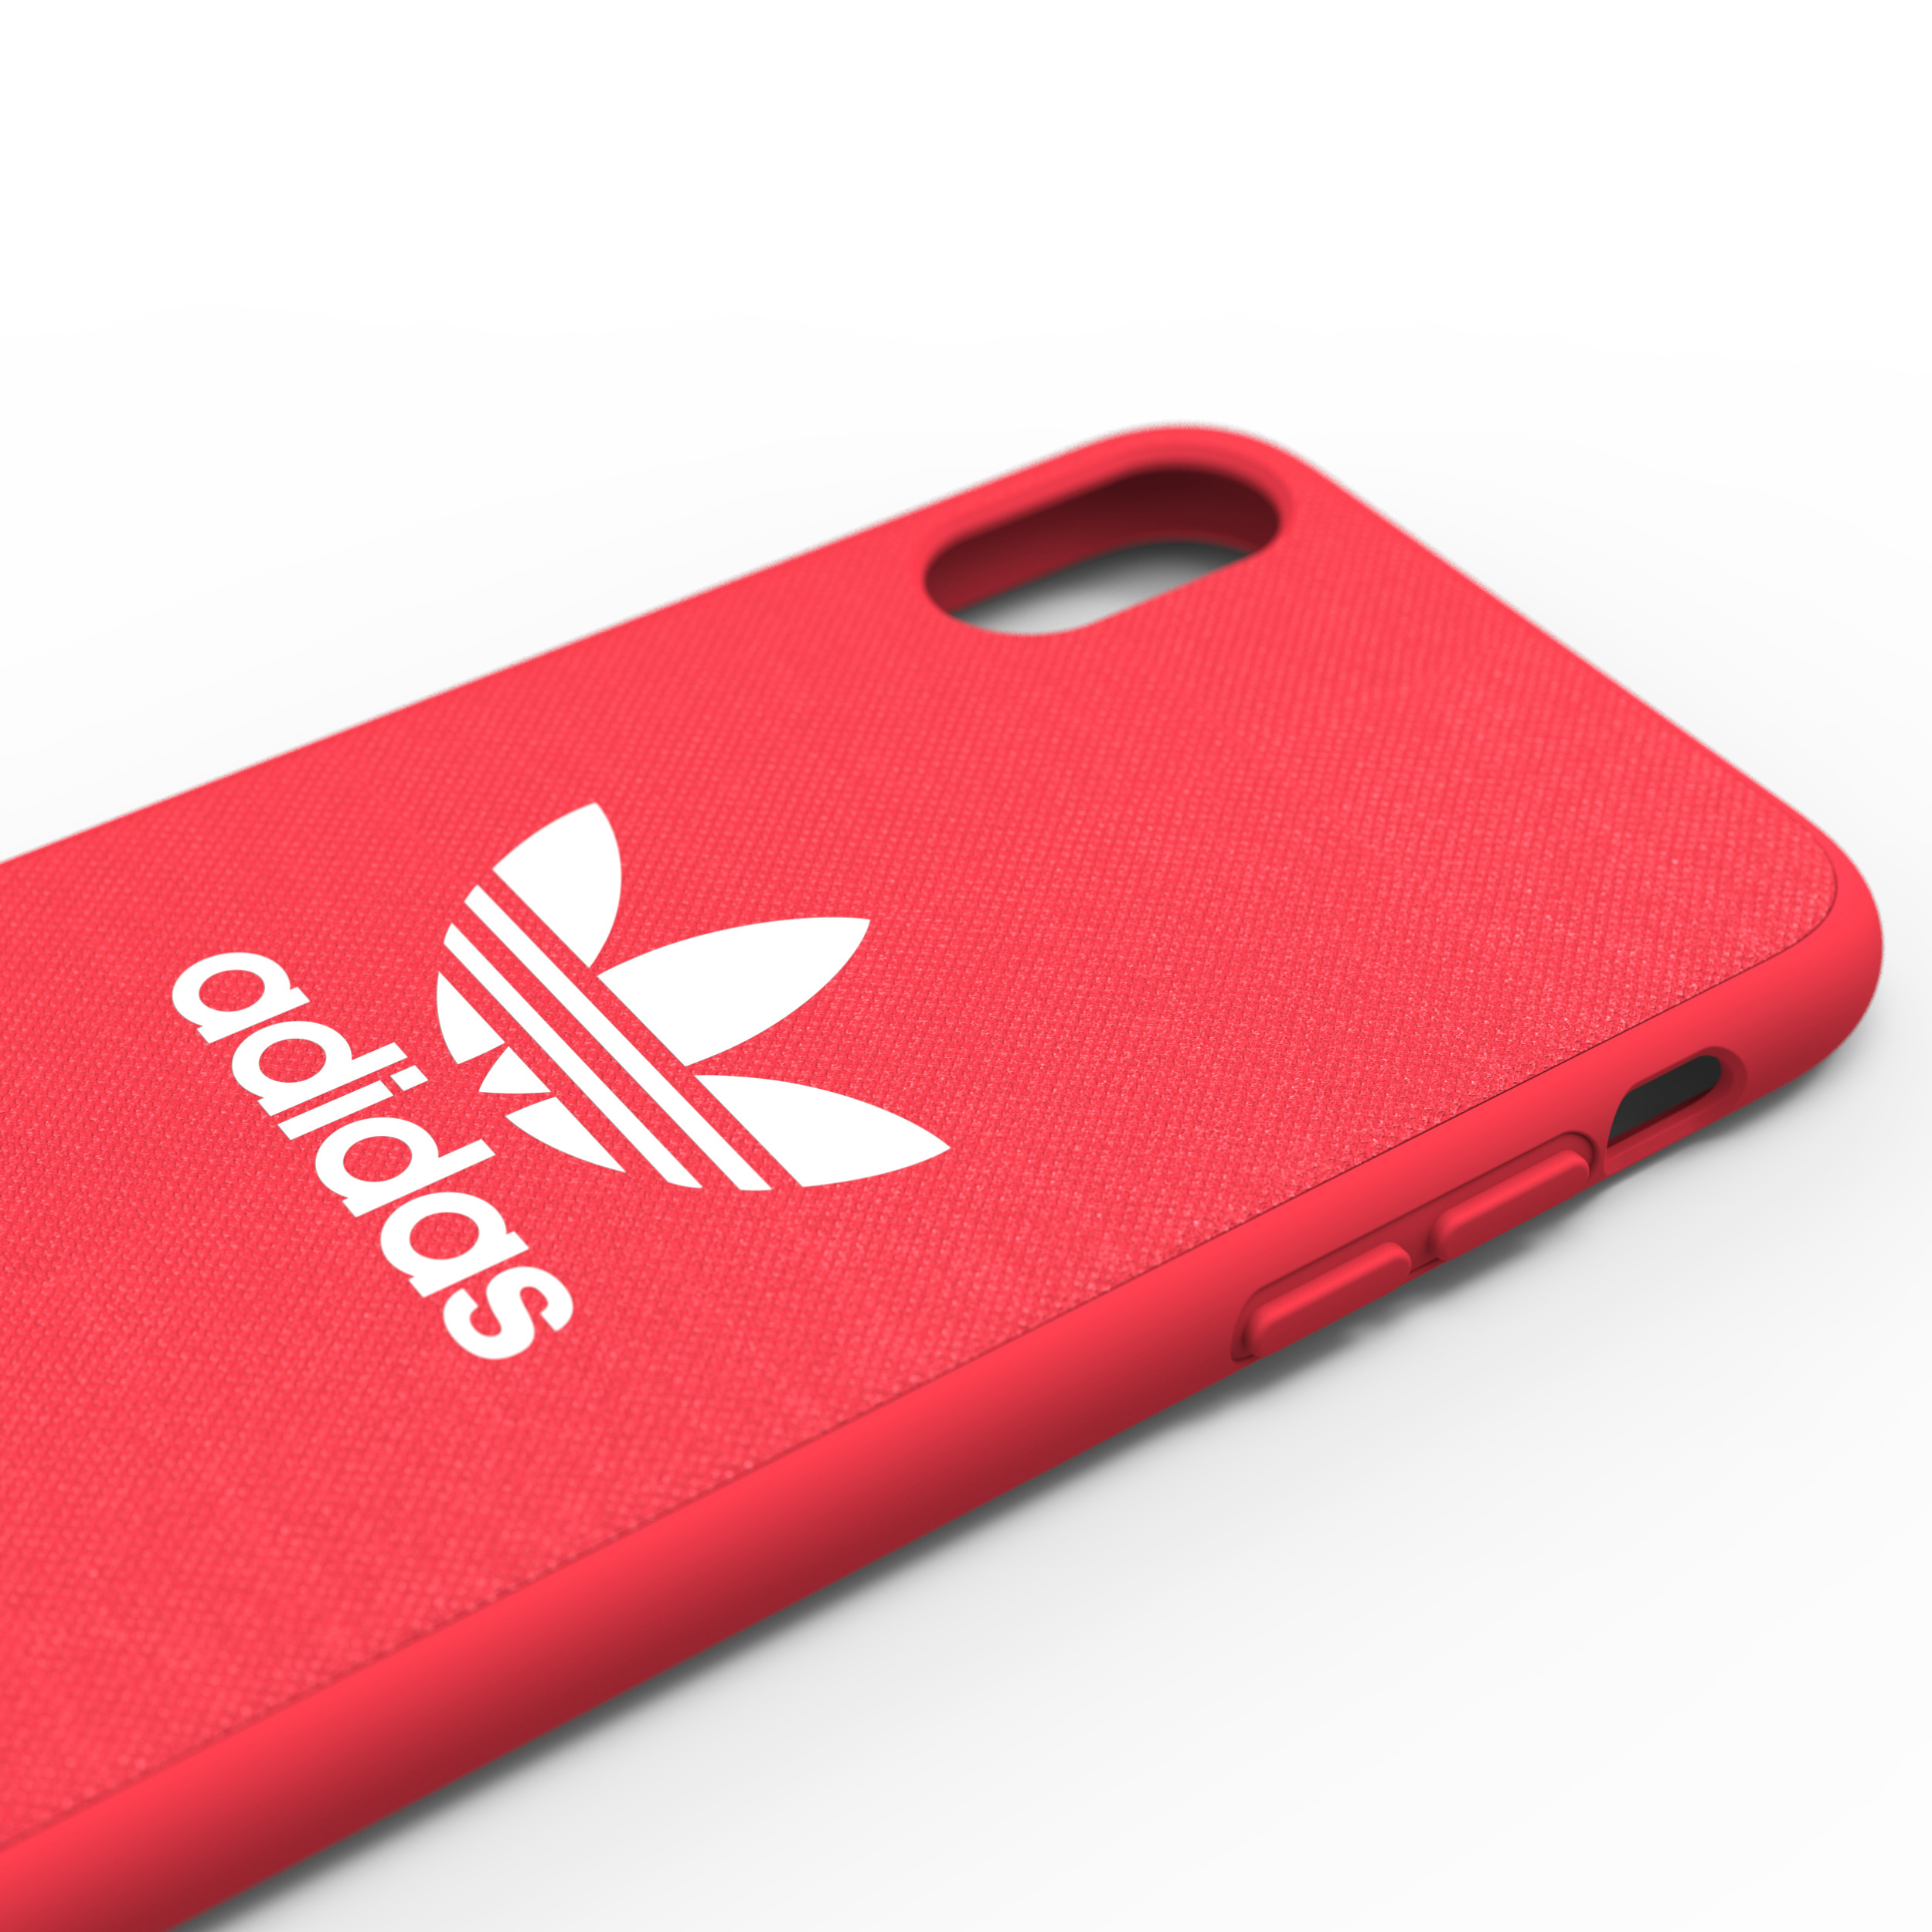 ADIDAS ORIGINALS Moulded Case, Backcover, X, iPhone Rot Apple